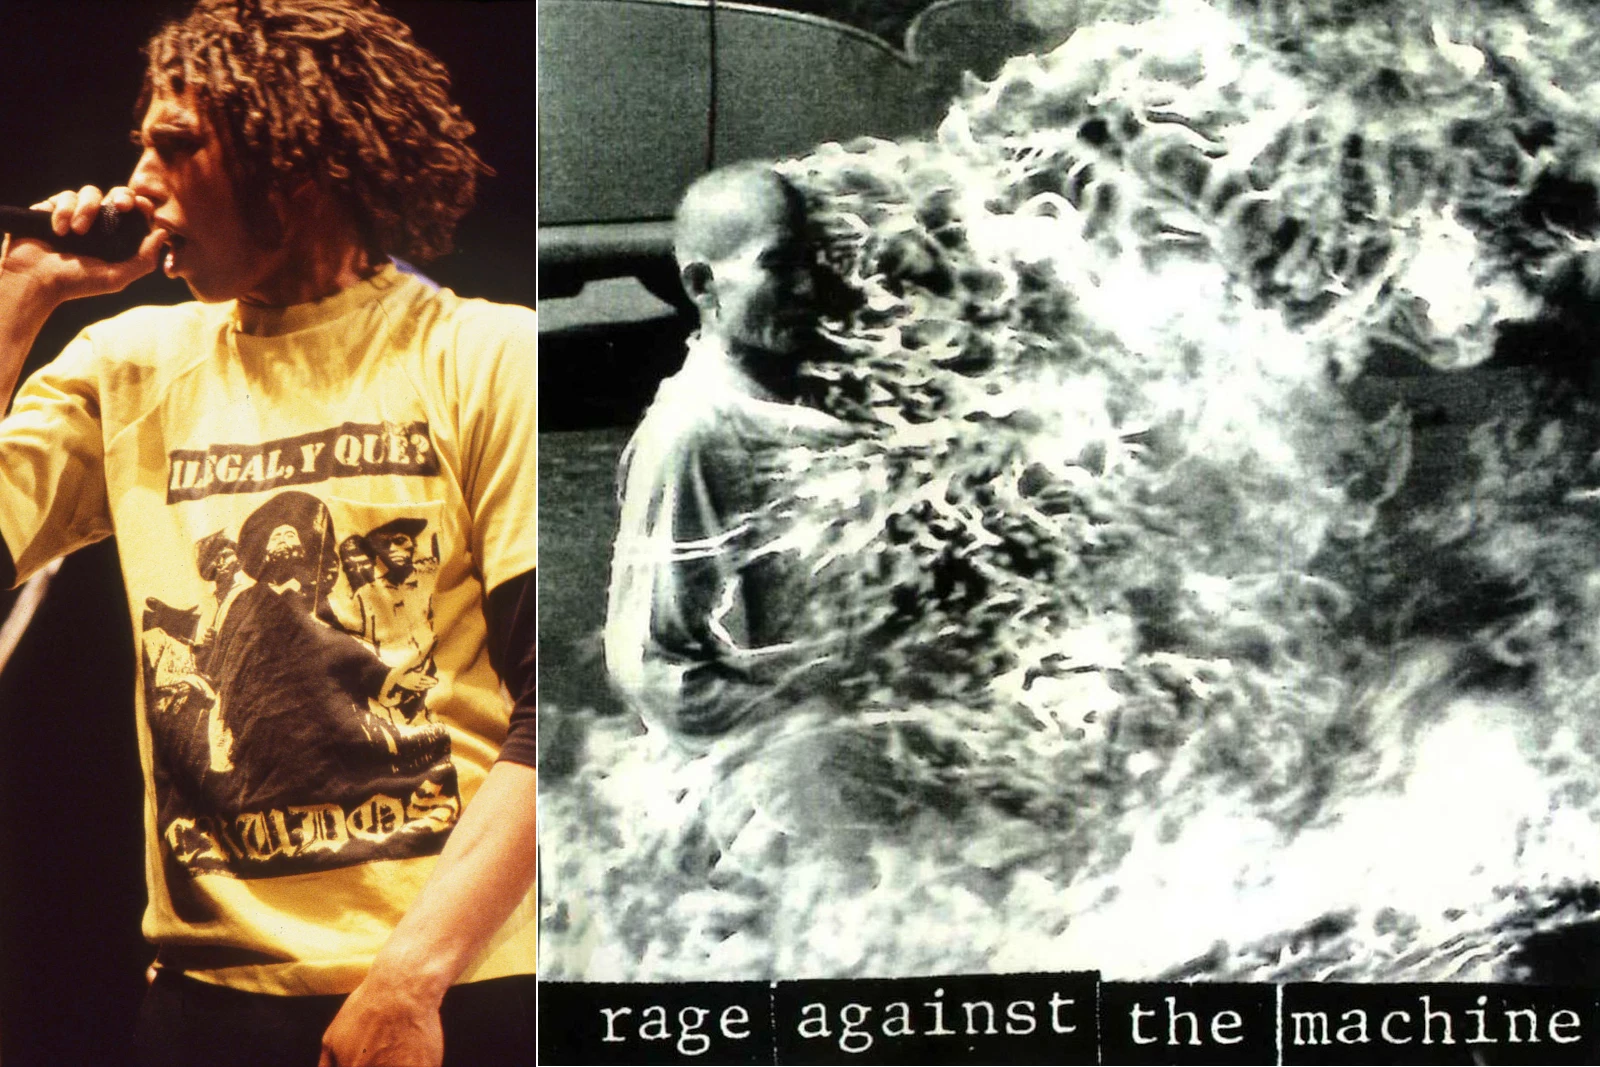 Rage Against the Machine: The Battle of Los Angeles Album Review